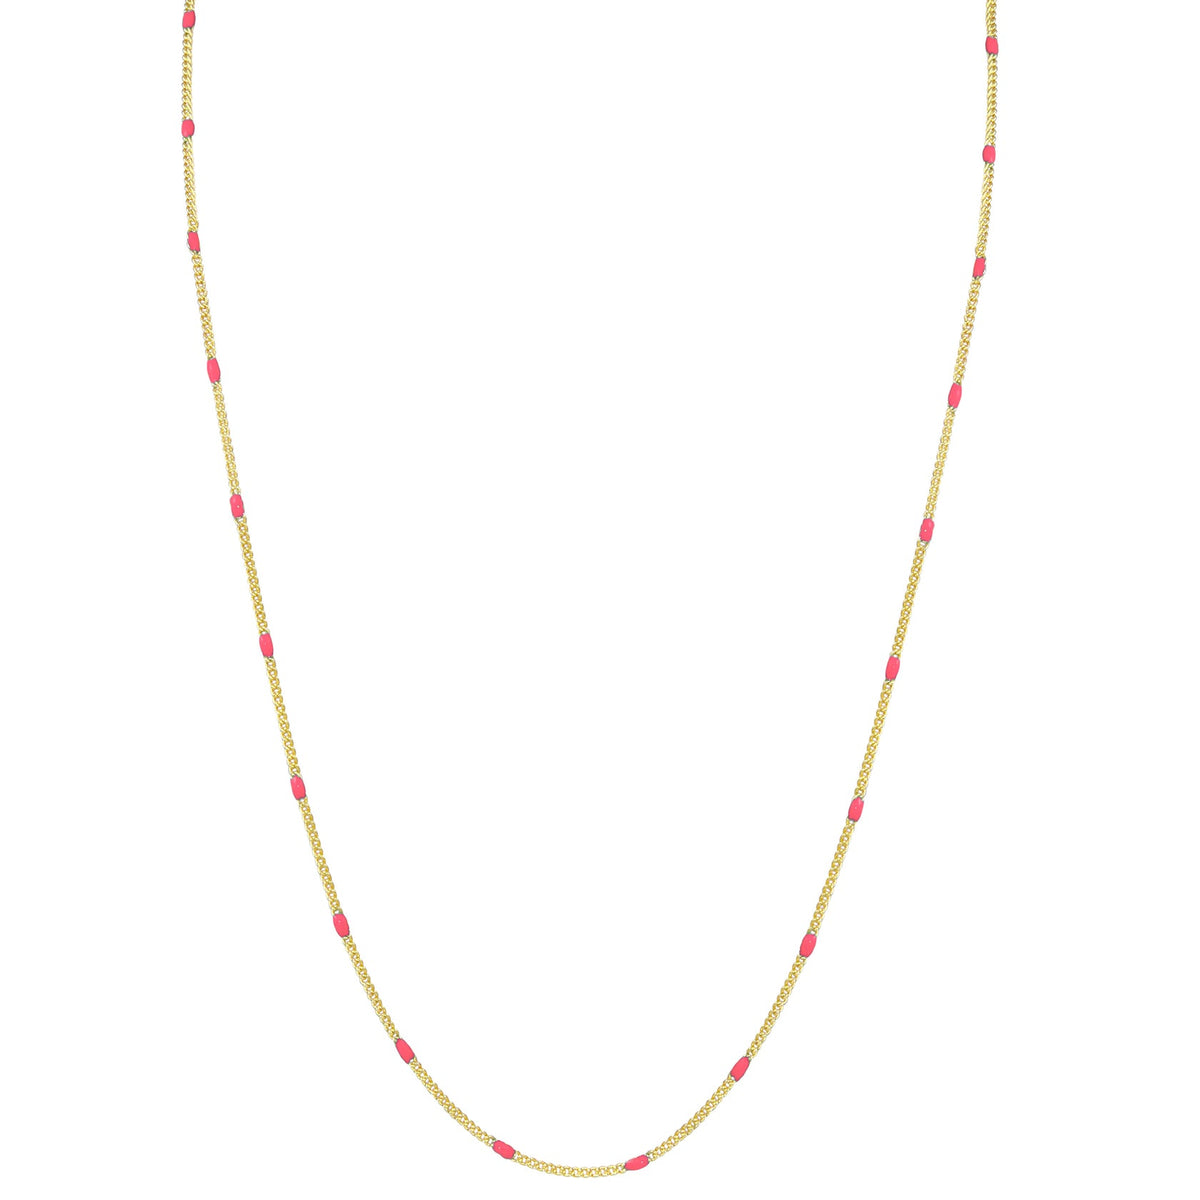 Gold Enamel Chains - ONFEMME By Lindsey's Kloset